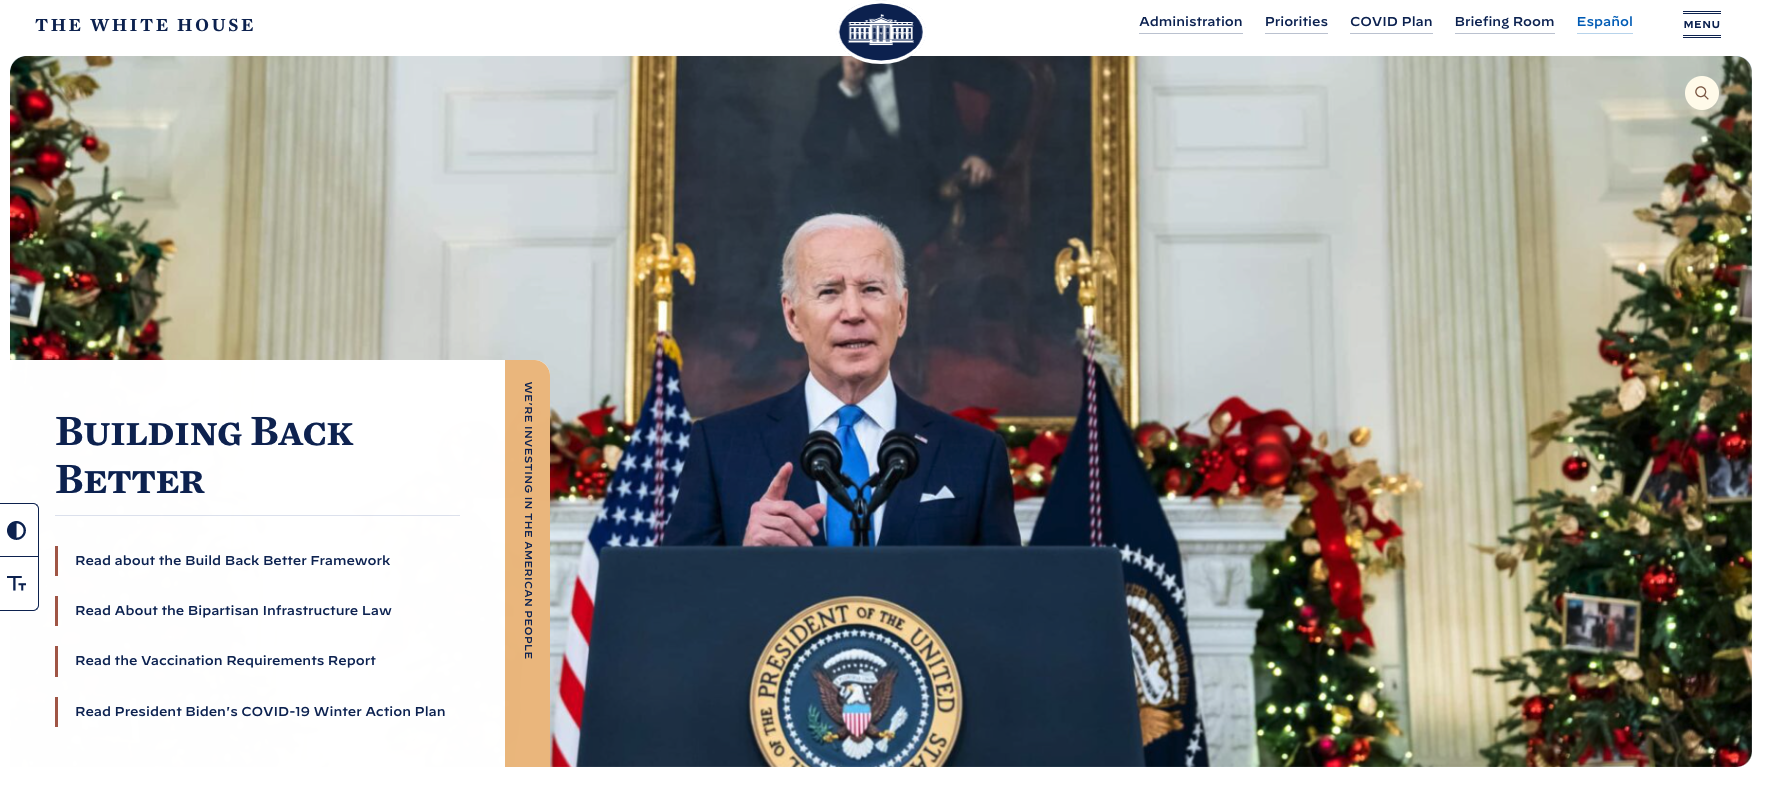 The White House homepage